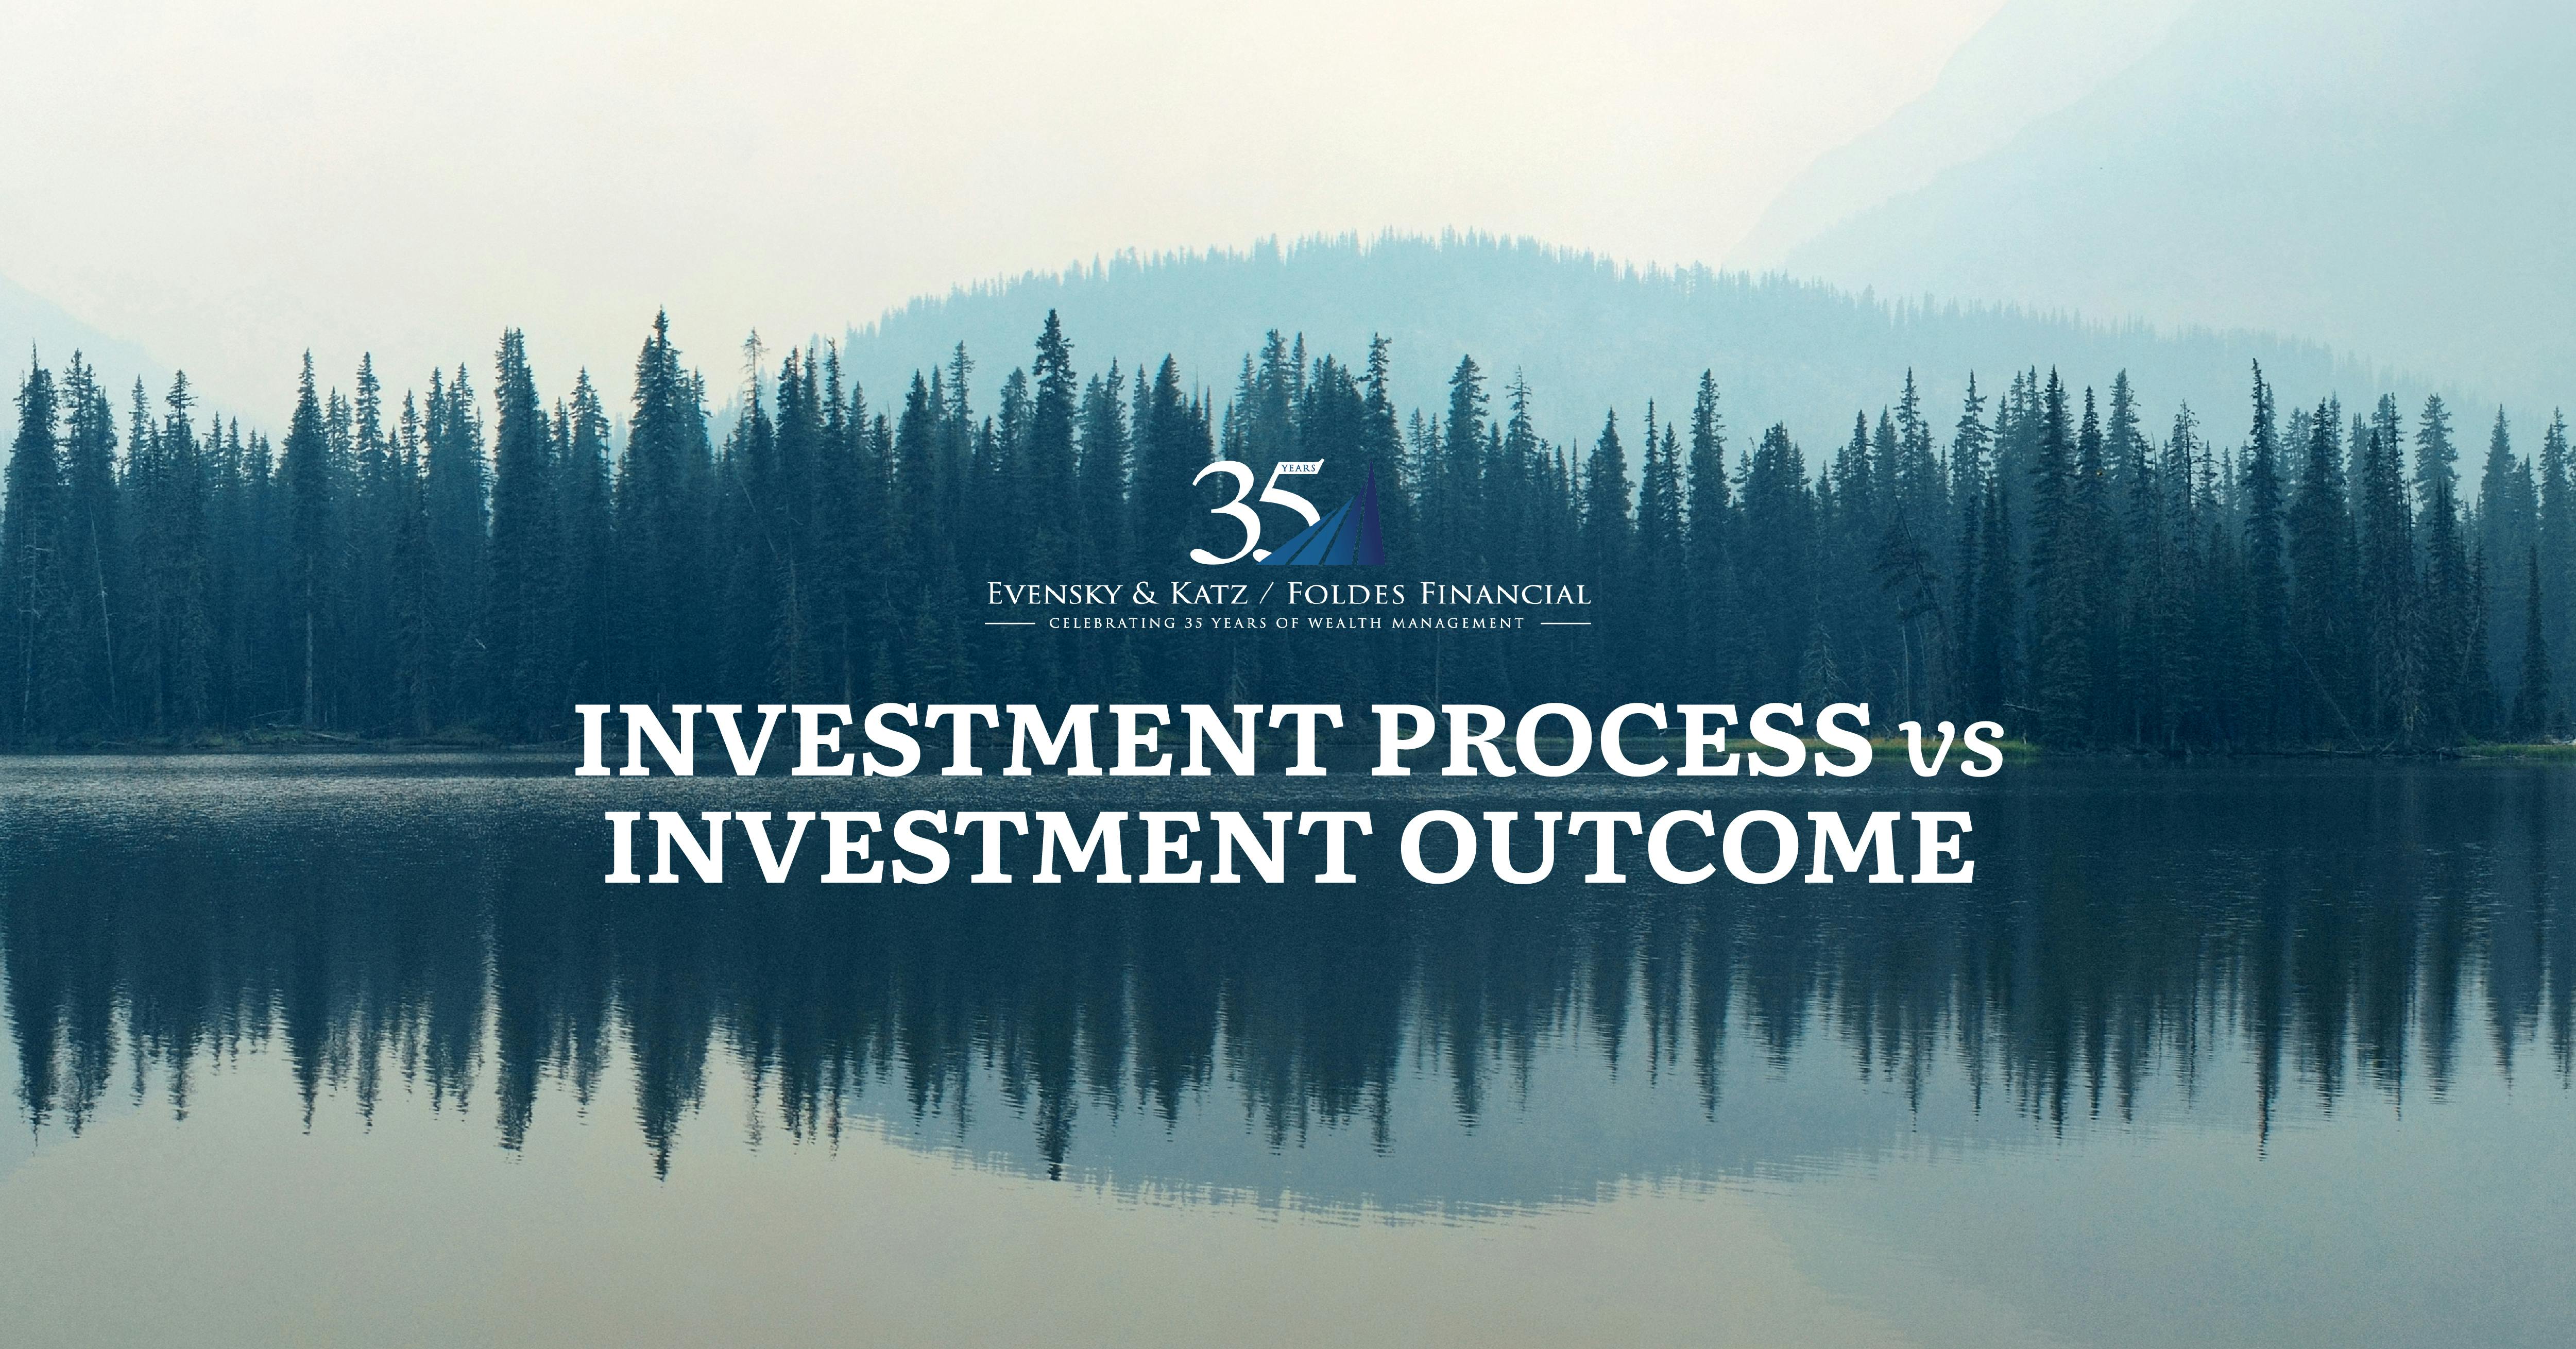 Why Focus on Investment Process over Investment Outcome? event